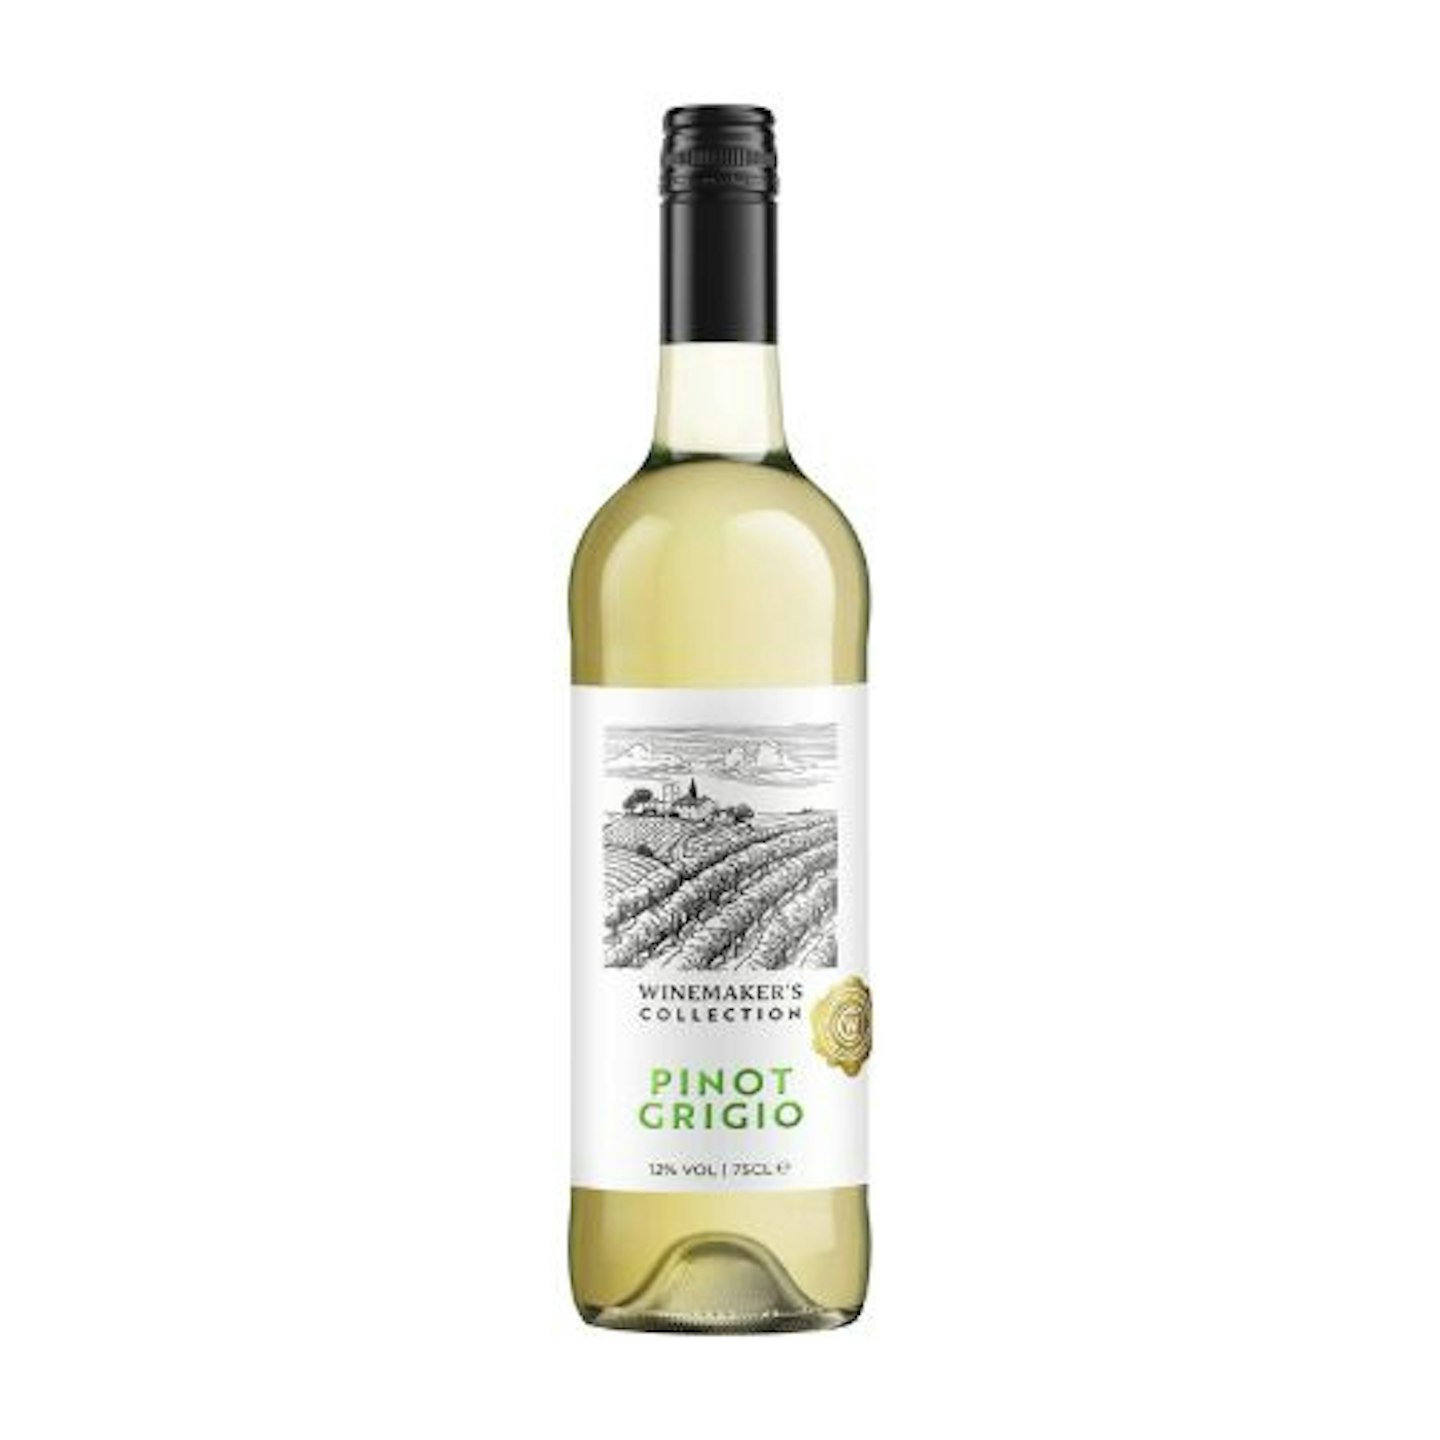 Winemaker's Collection Pinot Grigio 75cl